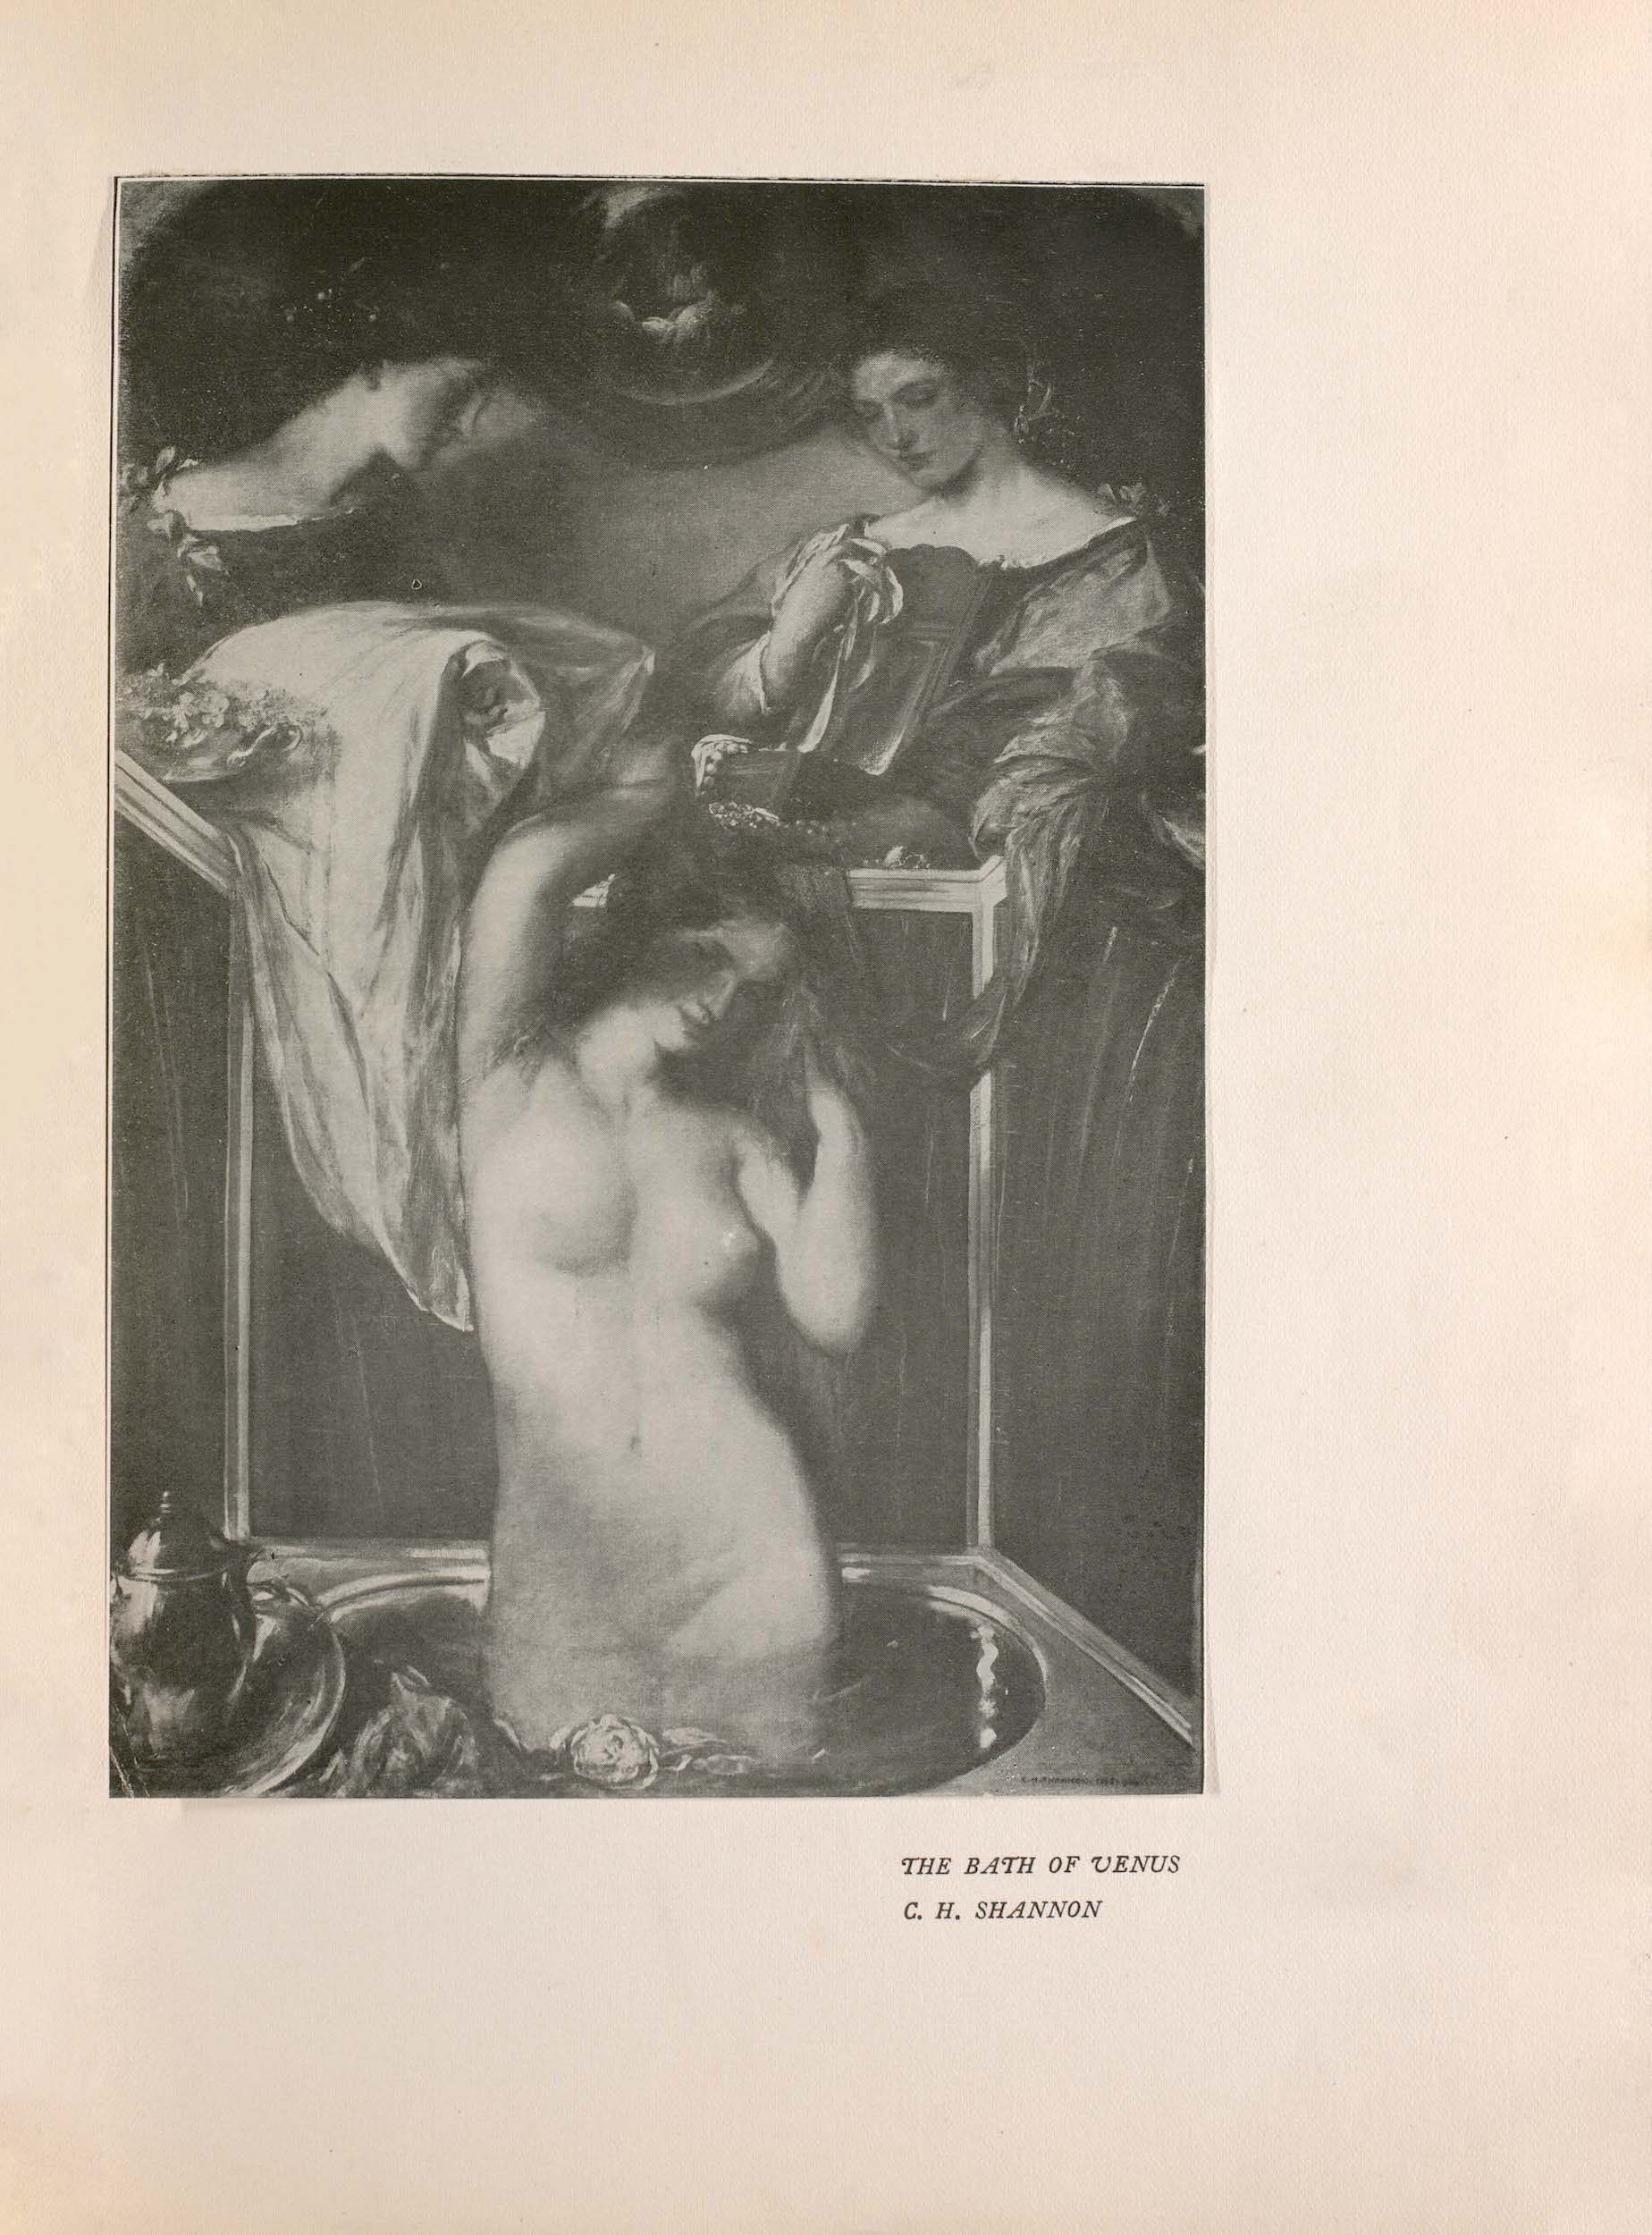 The tonal photogravure of the painting is in portrait orientation and is centered on the page. The image shows three women in a bathing chamber: two assistants, and one bather. Venus, the titular woman in the foreground, is standing in a small bath filled with water that is reaching her upper thighs; a white rose floats in the water in front of her. She is unclothed and her head is slightly tilted to the right. Her right hand is in her hair and her left arm is reaching above her head. Behind the unclothed woman is a black screen with three panels. Behind her on either stand women in dark full-length dresses. The woman on the left is holding a large white cloth and looking down towards the bathing woman. The woman on the right is holding a mirror, a jewelry box, and jewelry. There is a small circular mirror in the upper center of the wall behind them. In the bottom left foreground, sitting on the edge of the bath, there is a teapot on a platter.